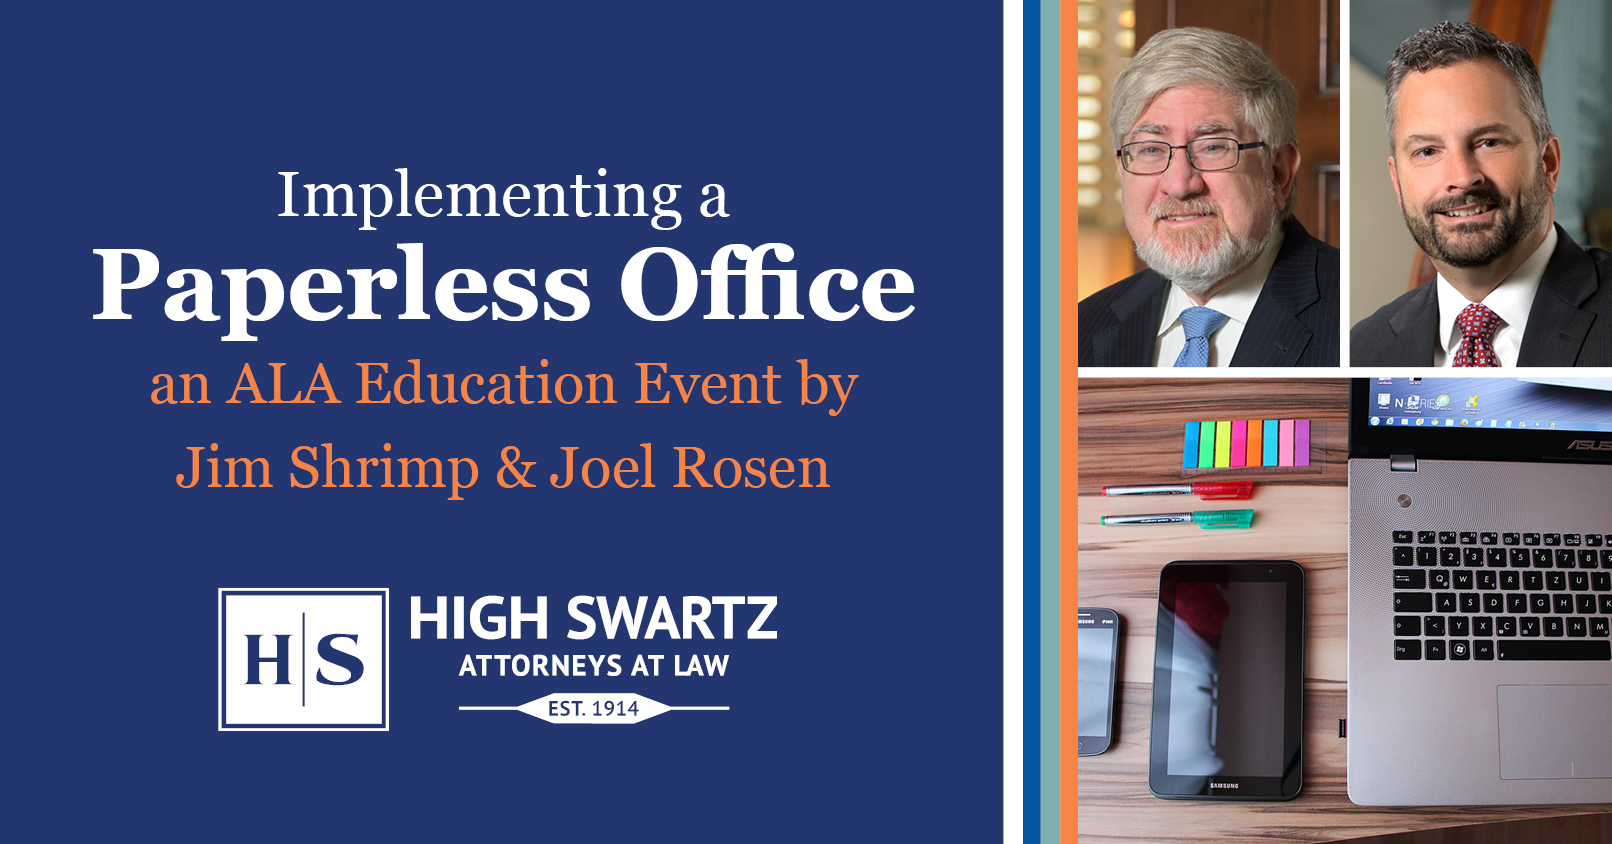 Implementing a Paperless Office CLE by Joel Rosen & Jim Shrimp